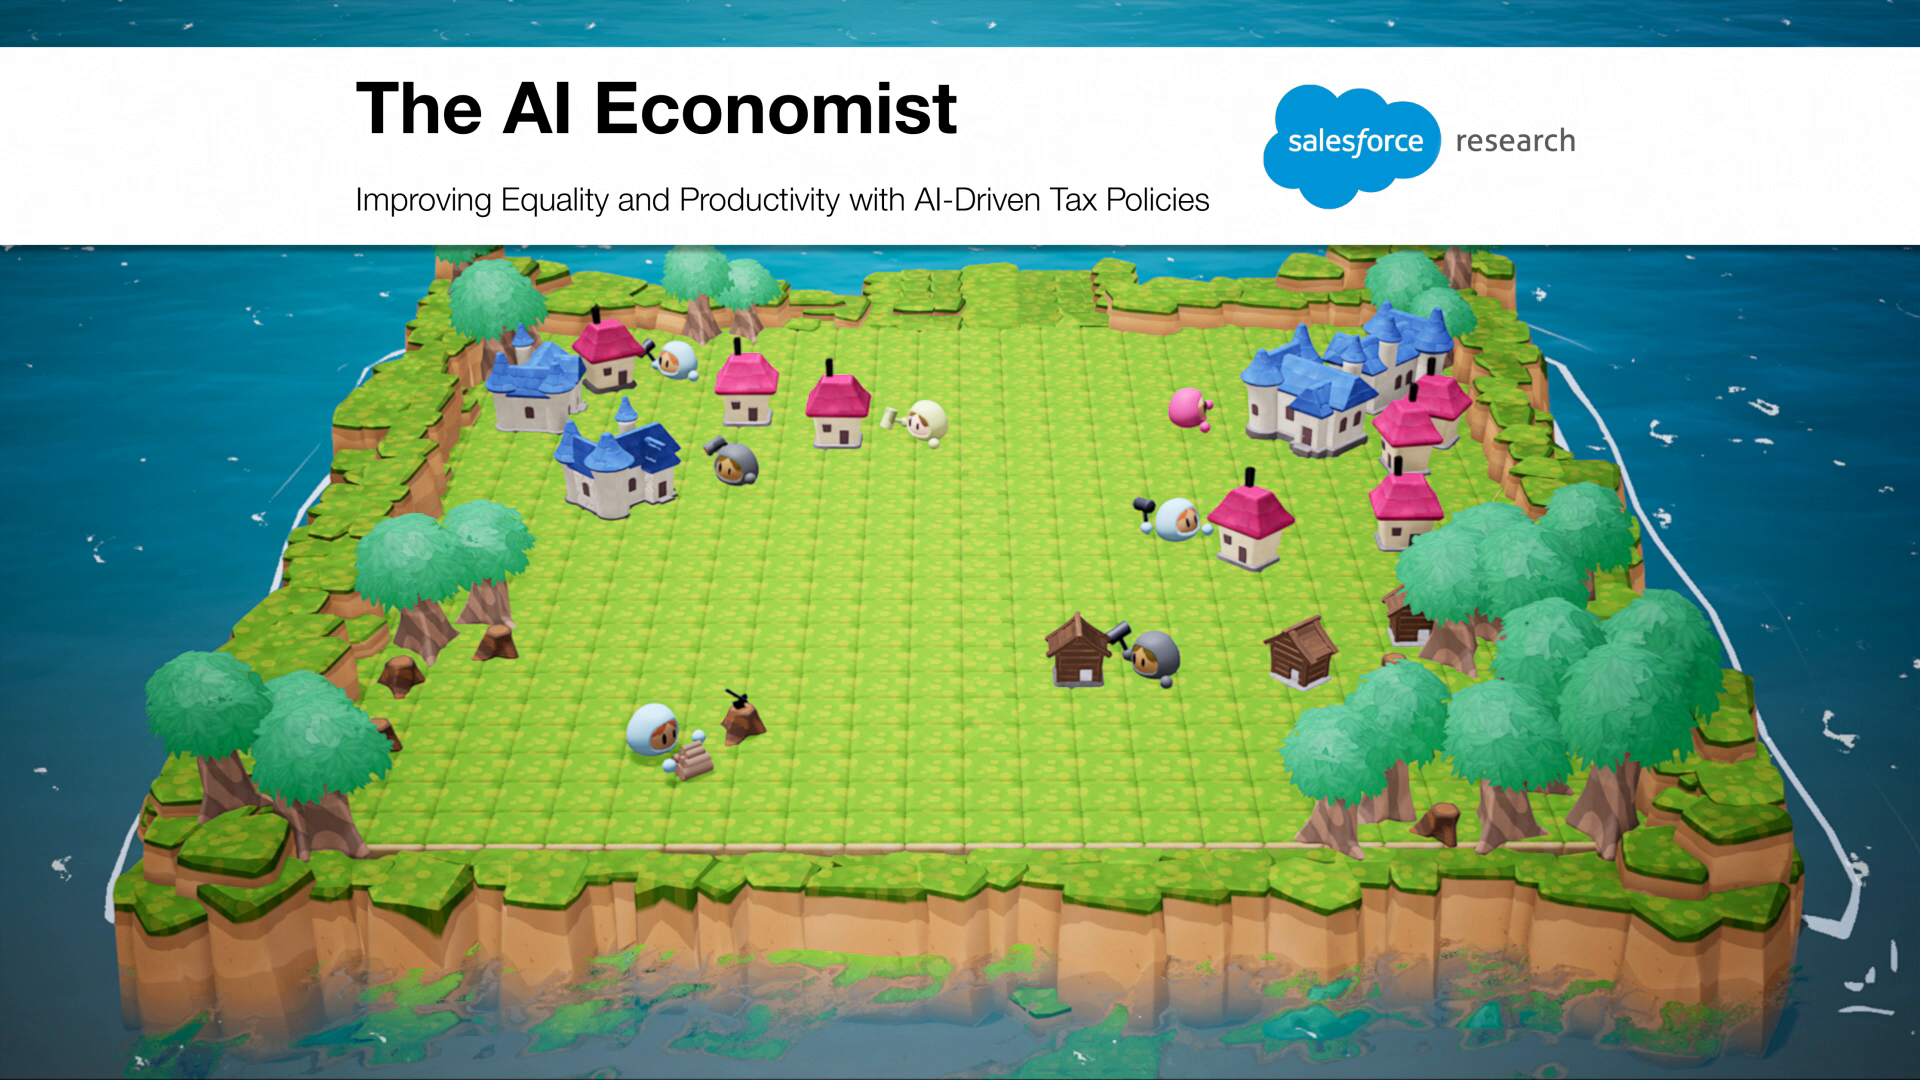 Screen capture image of the Salesforce AI Economist program, with a field of green populated by houses